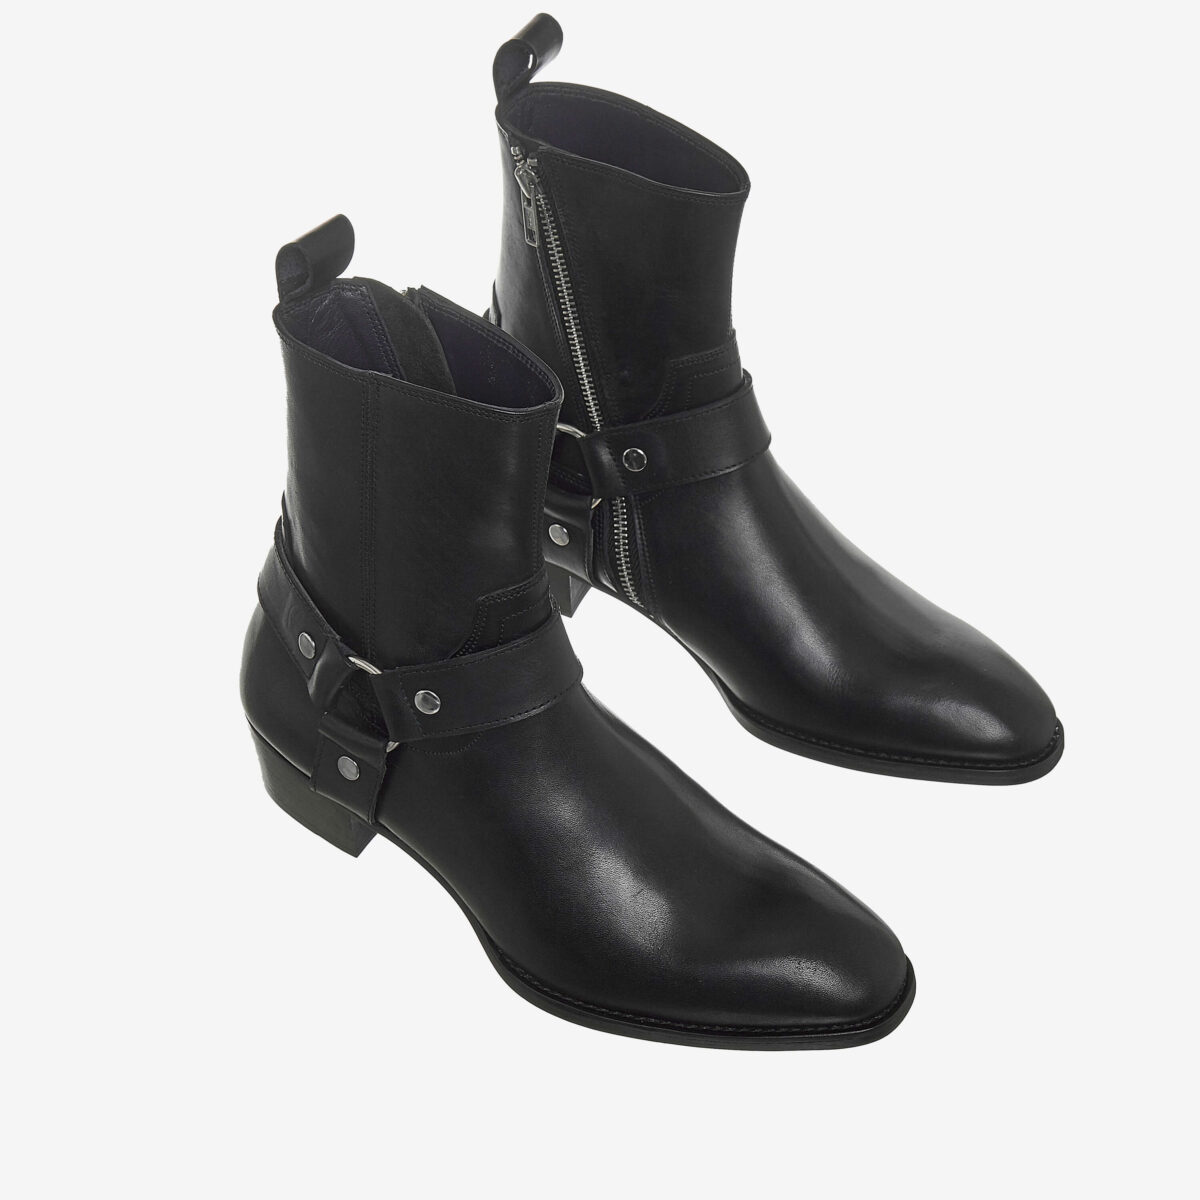 Rowan Leather Harness Boots In Black Leather Harness Boots In Black SS2020 3